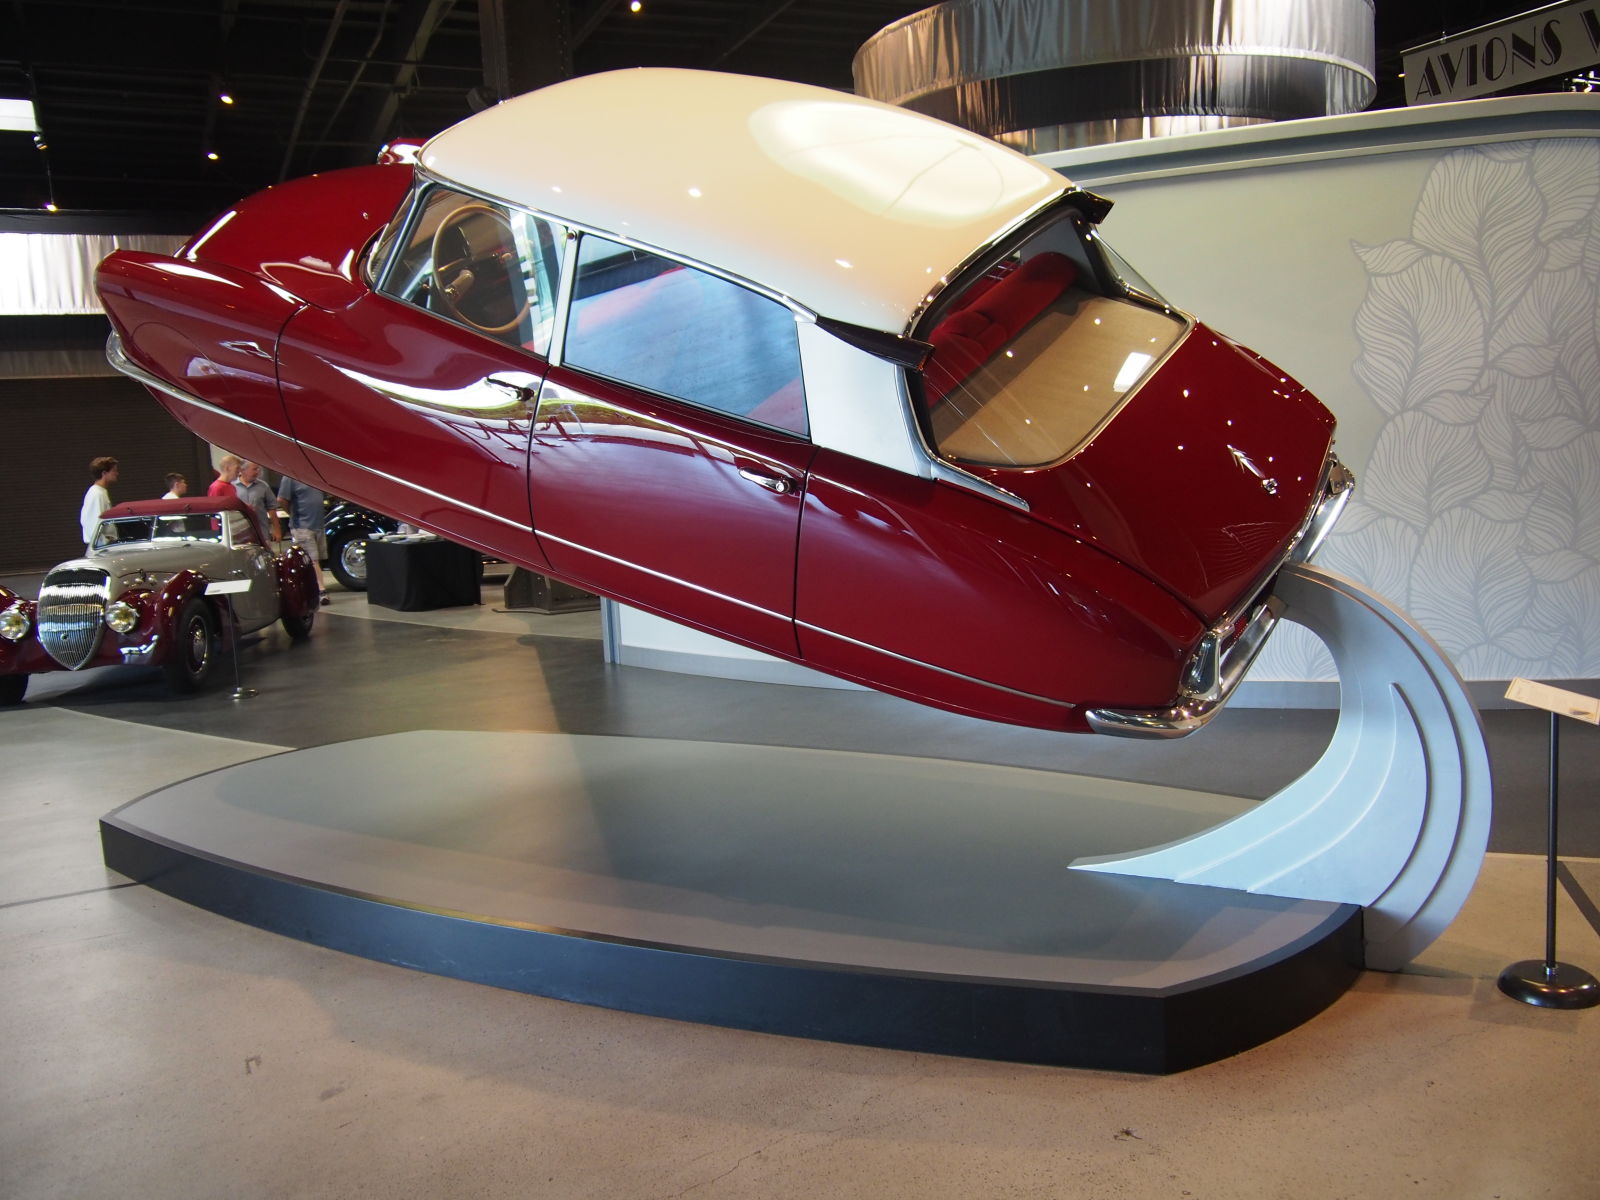 You’re greeted by this flying DS (actually an ID body). It’s a recreation of a famous Citroën auto show display.